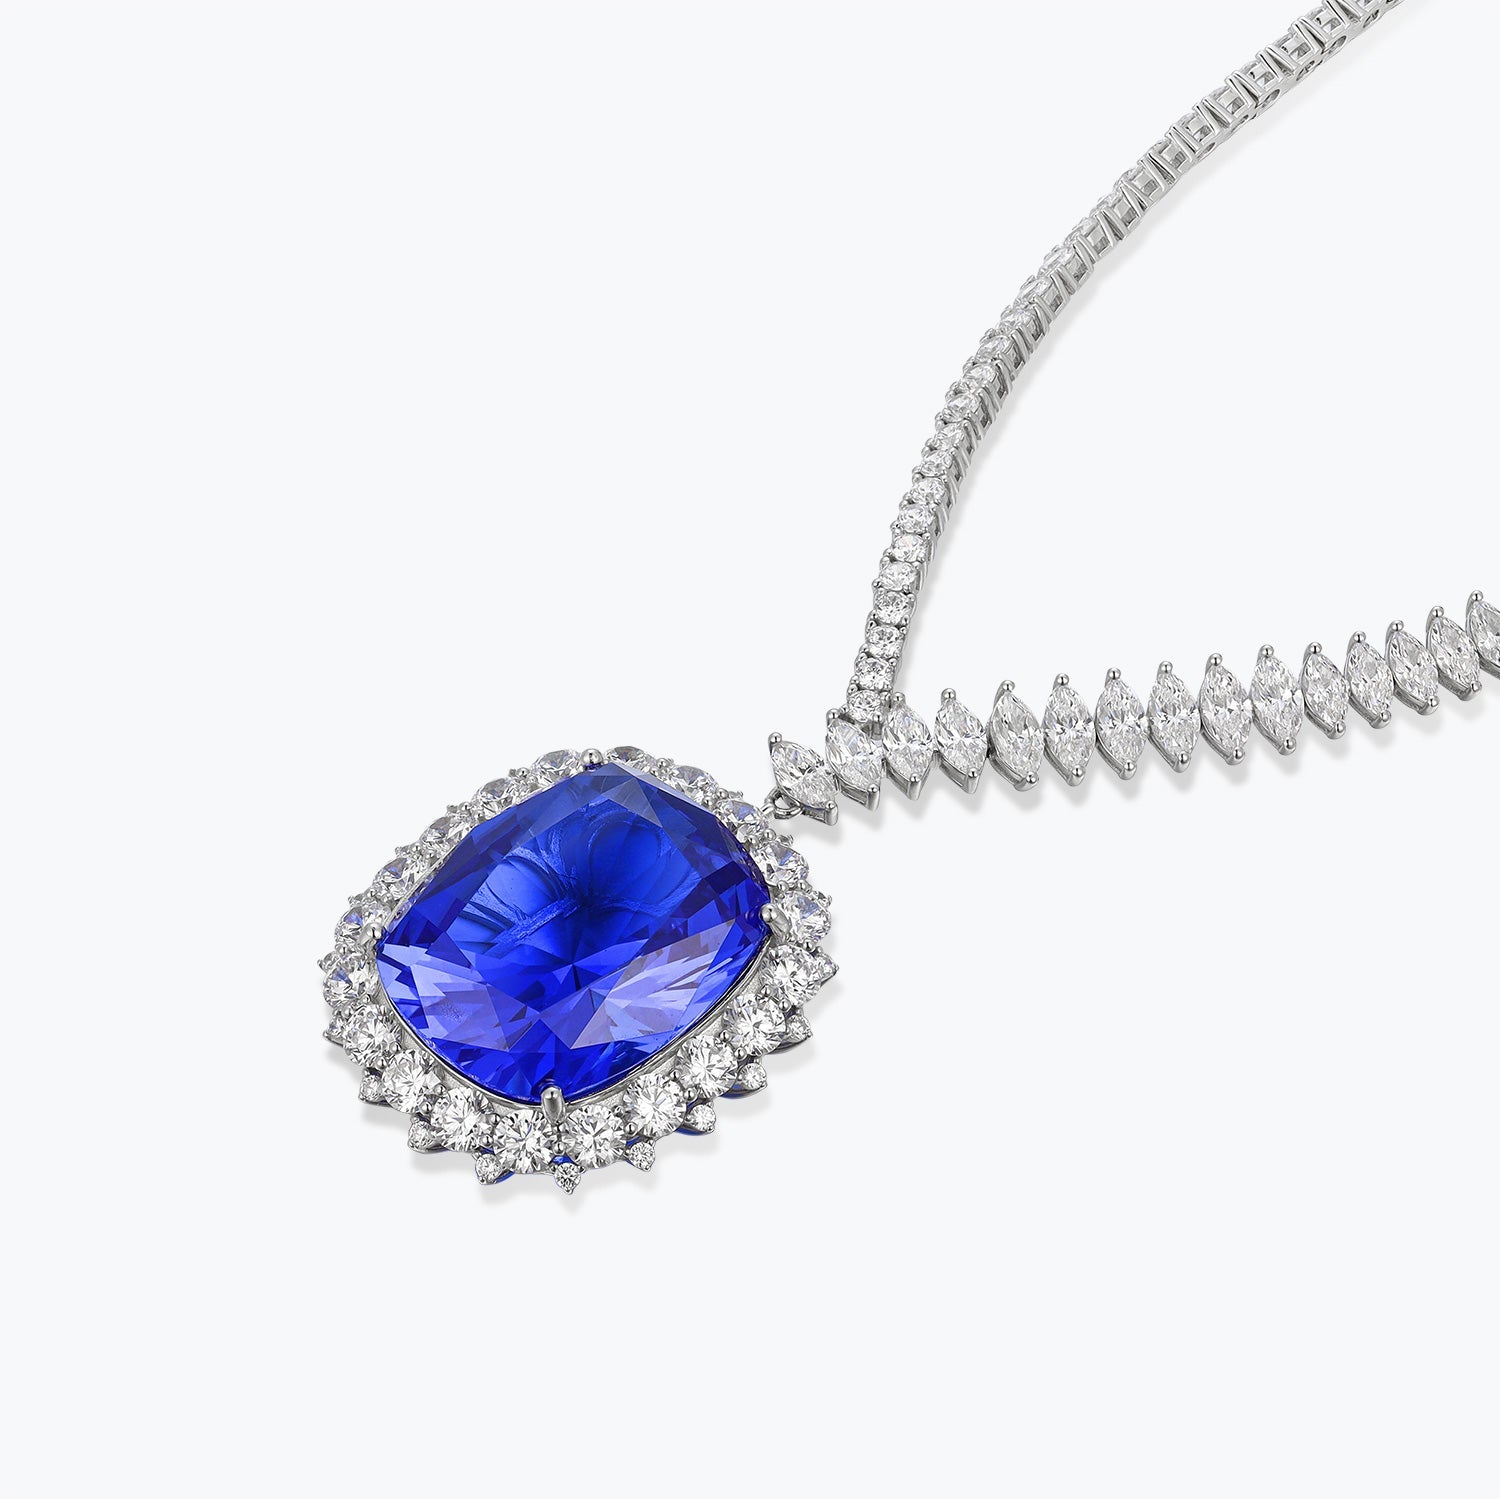 Oval Cut Royal Blue Sapphire Necklace&Pendant - dissoojewelry